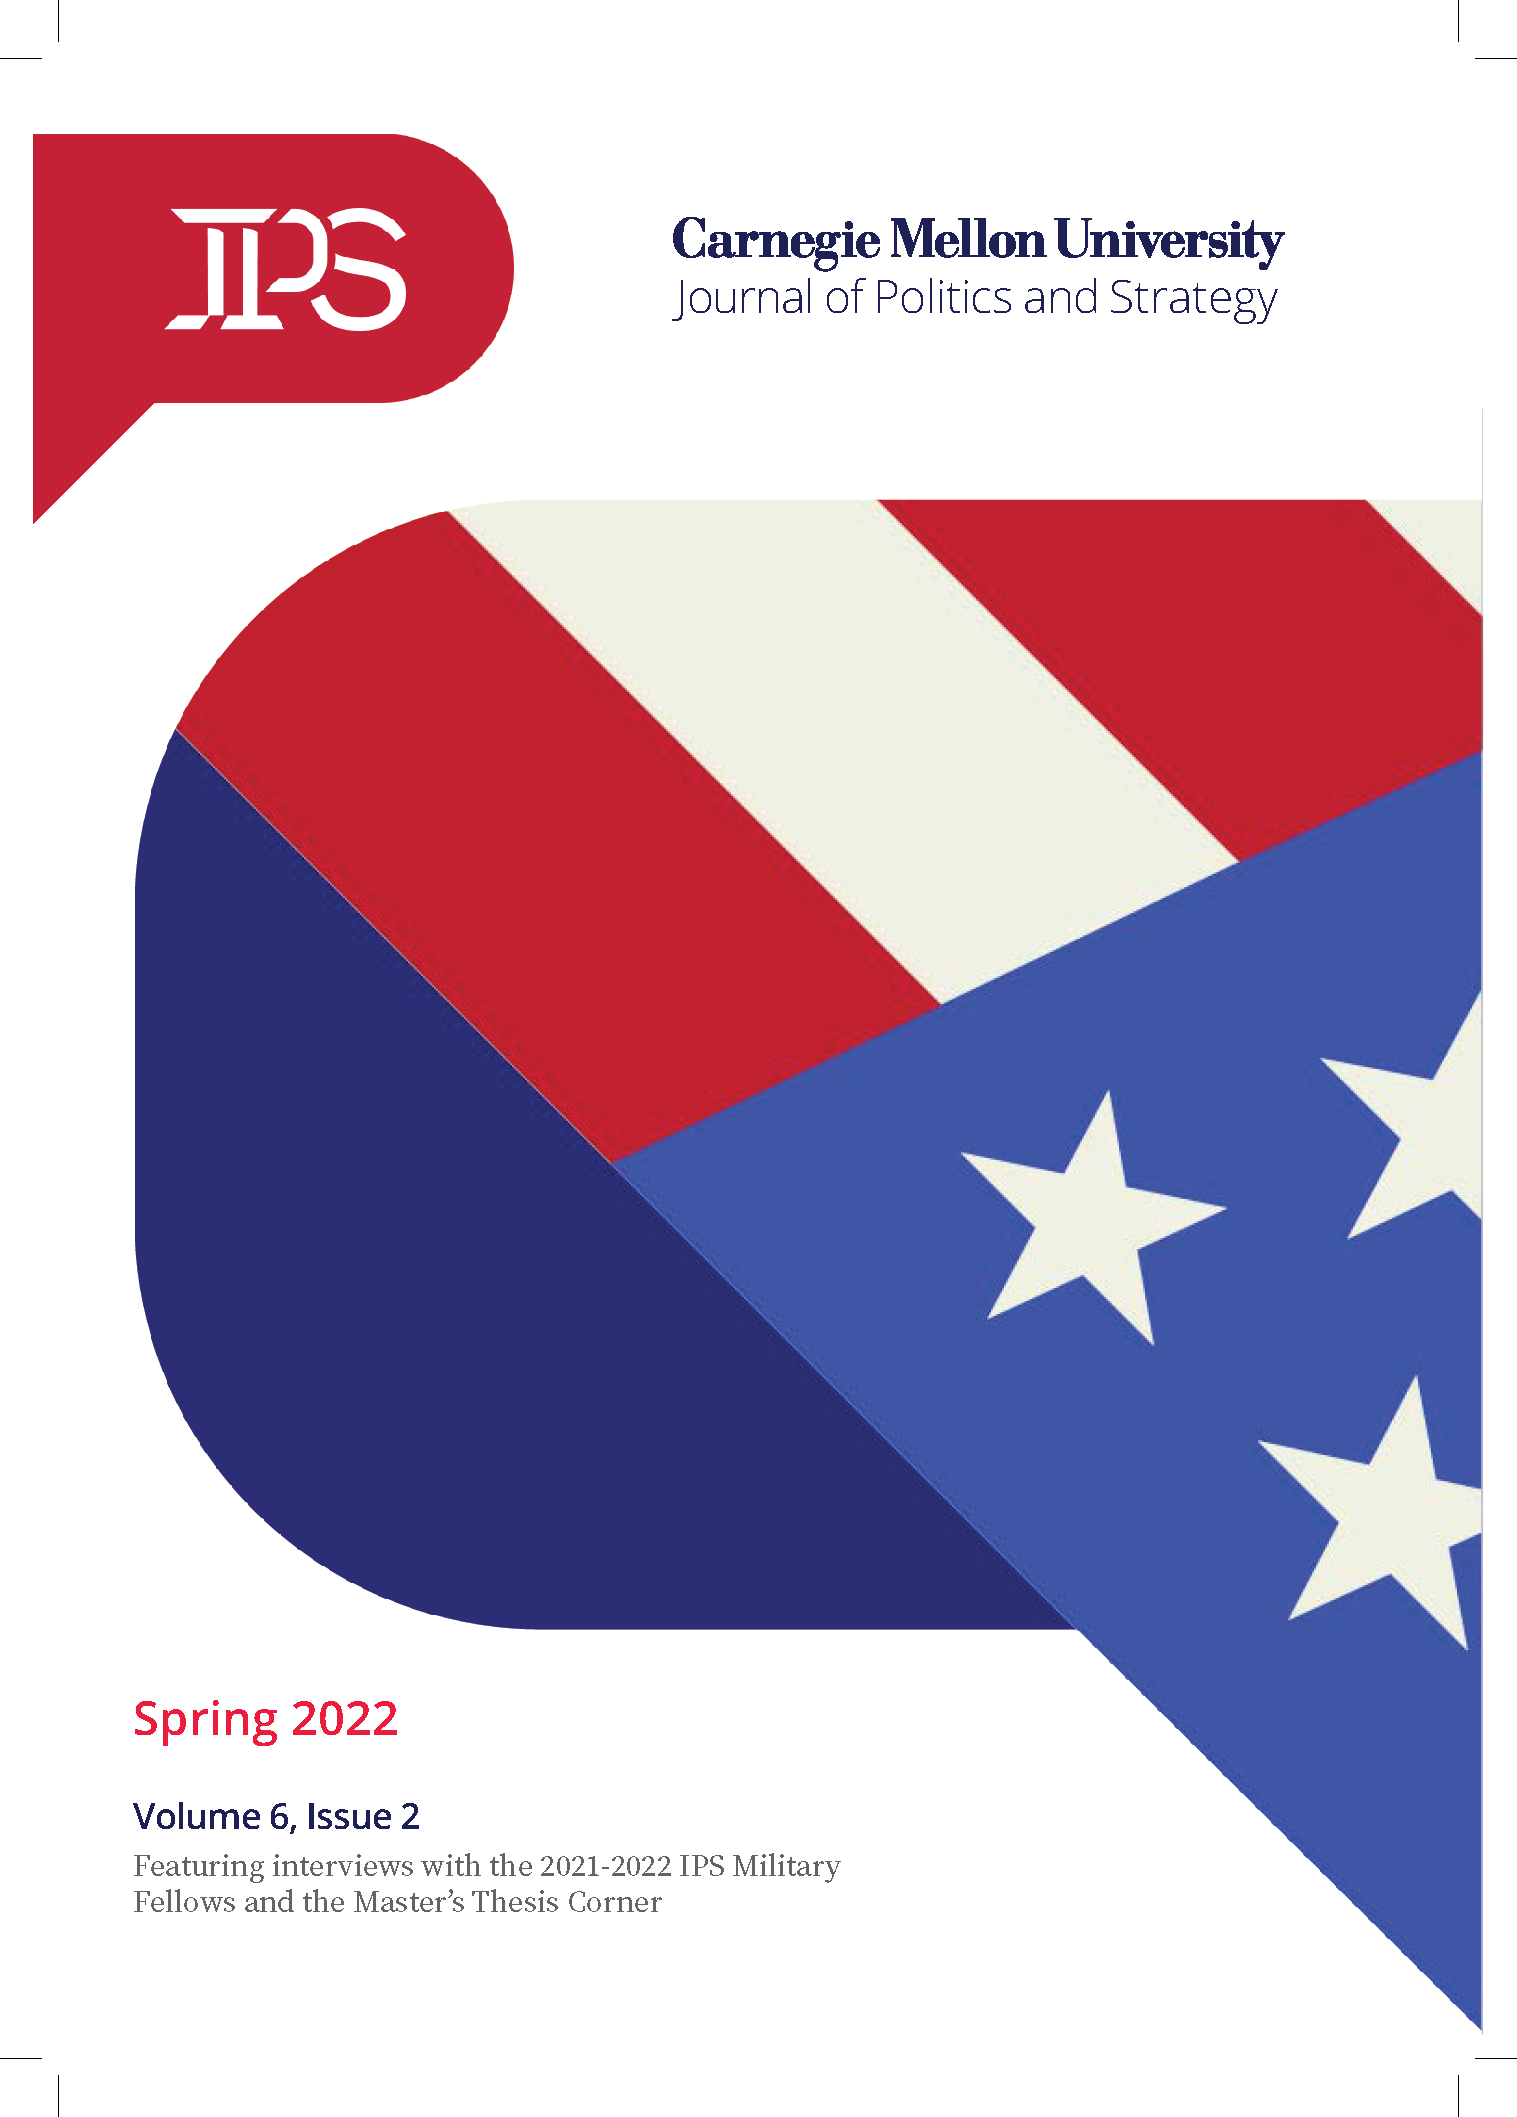 cover-jps_2022_vol6_issue2_spring_final.png